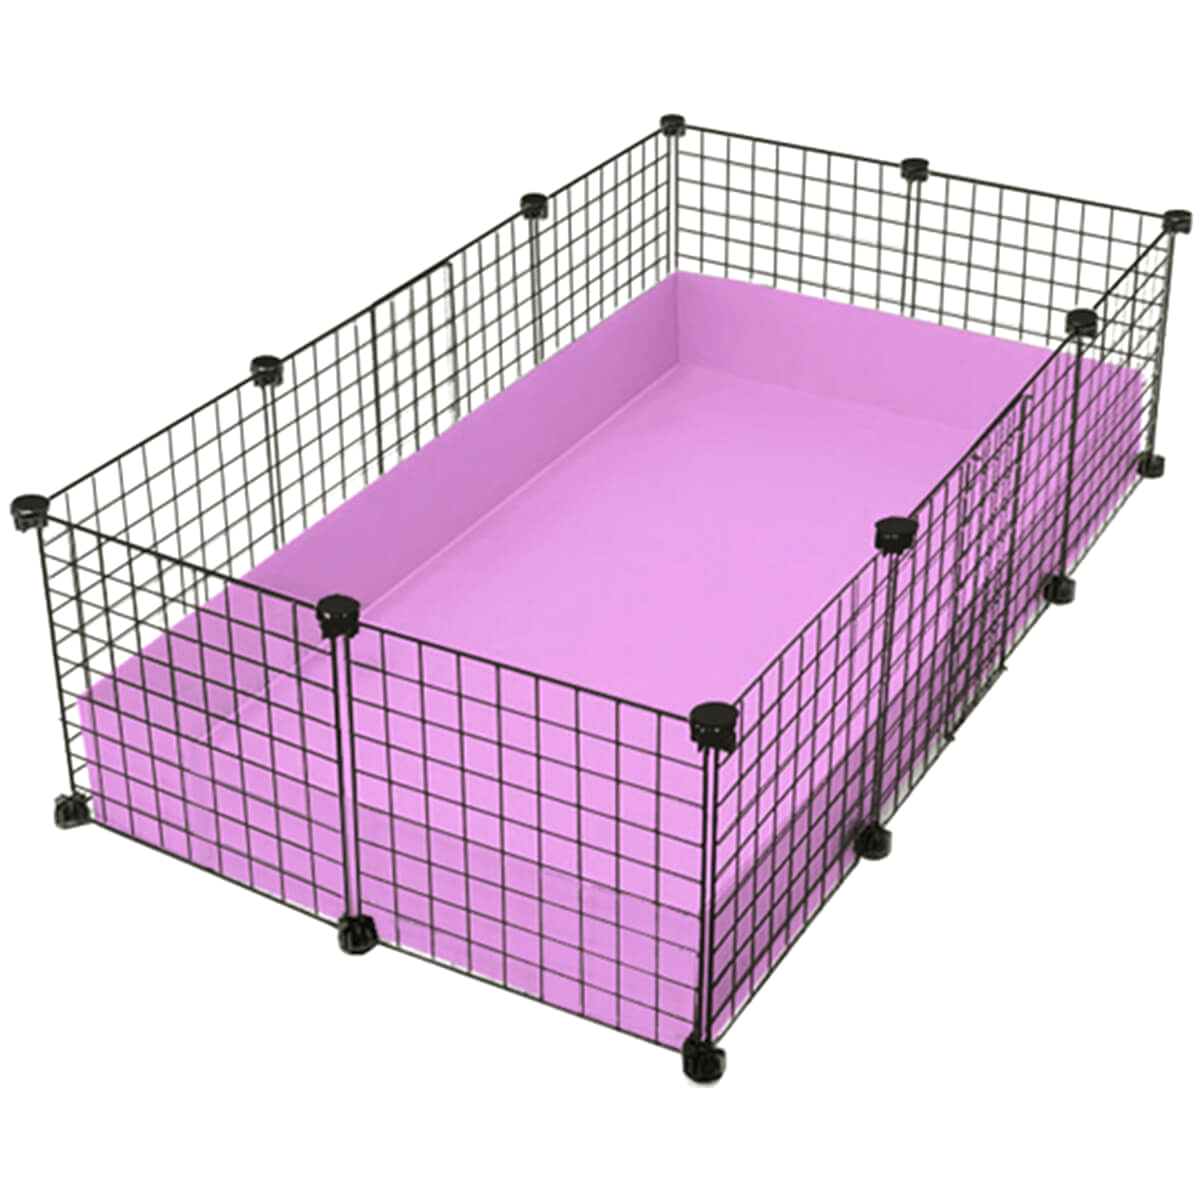 30 by 50 guinea pig cage